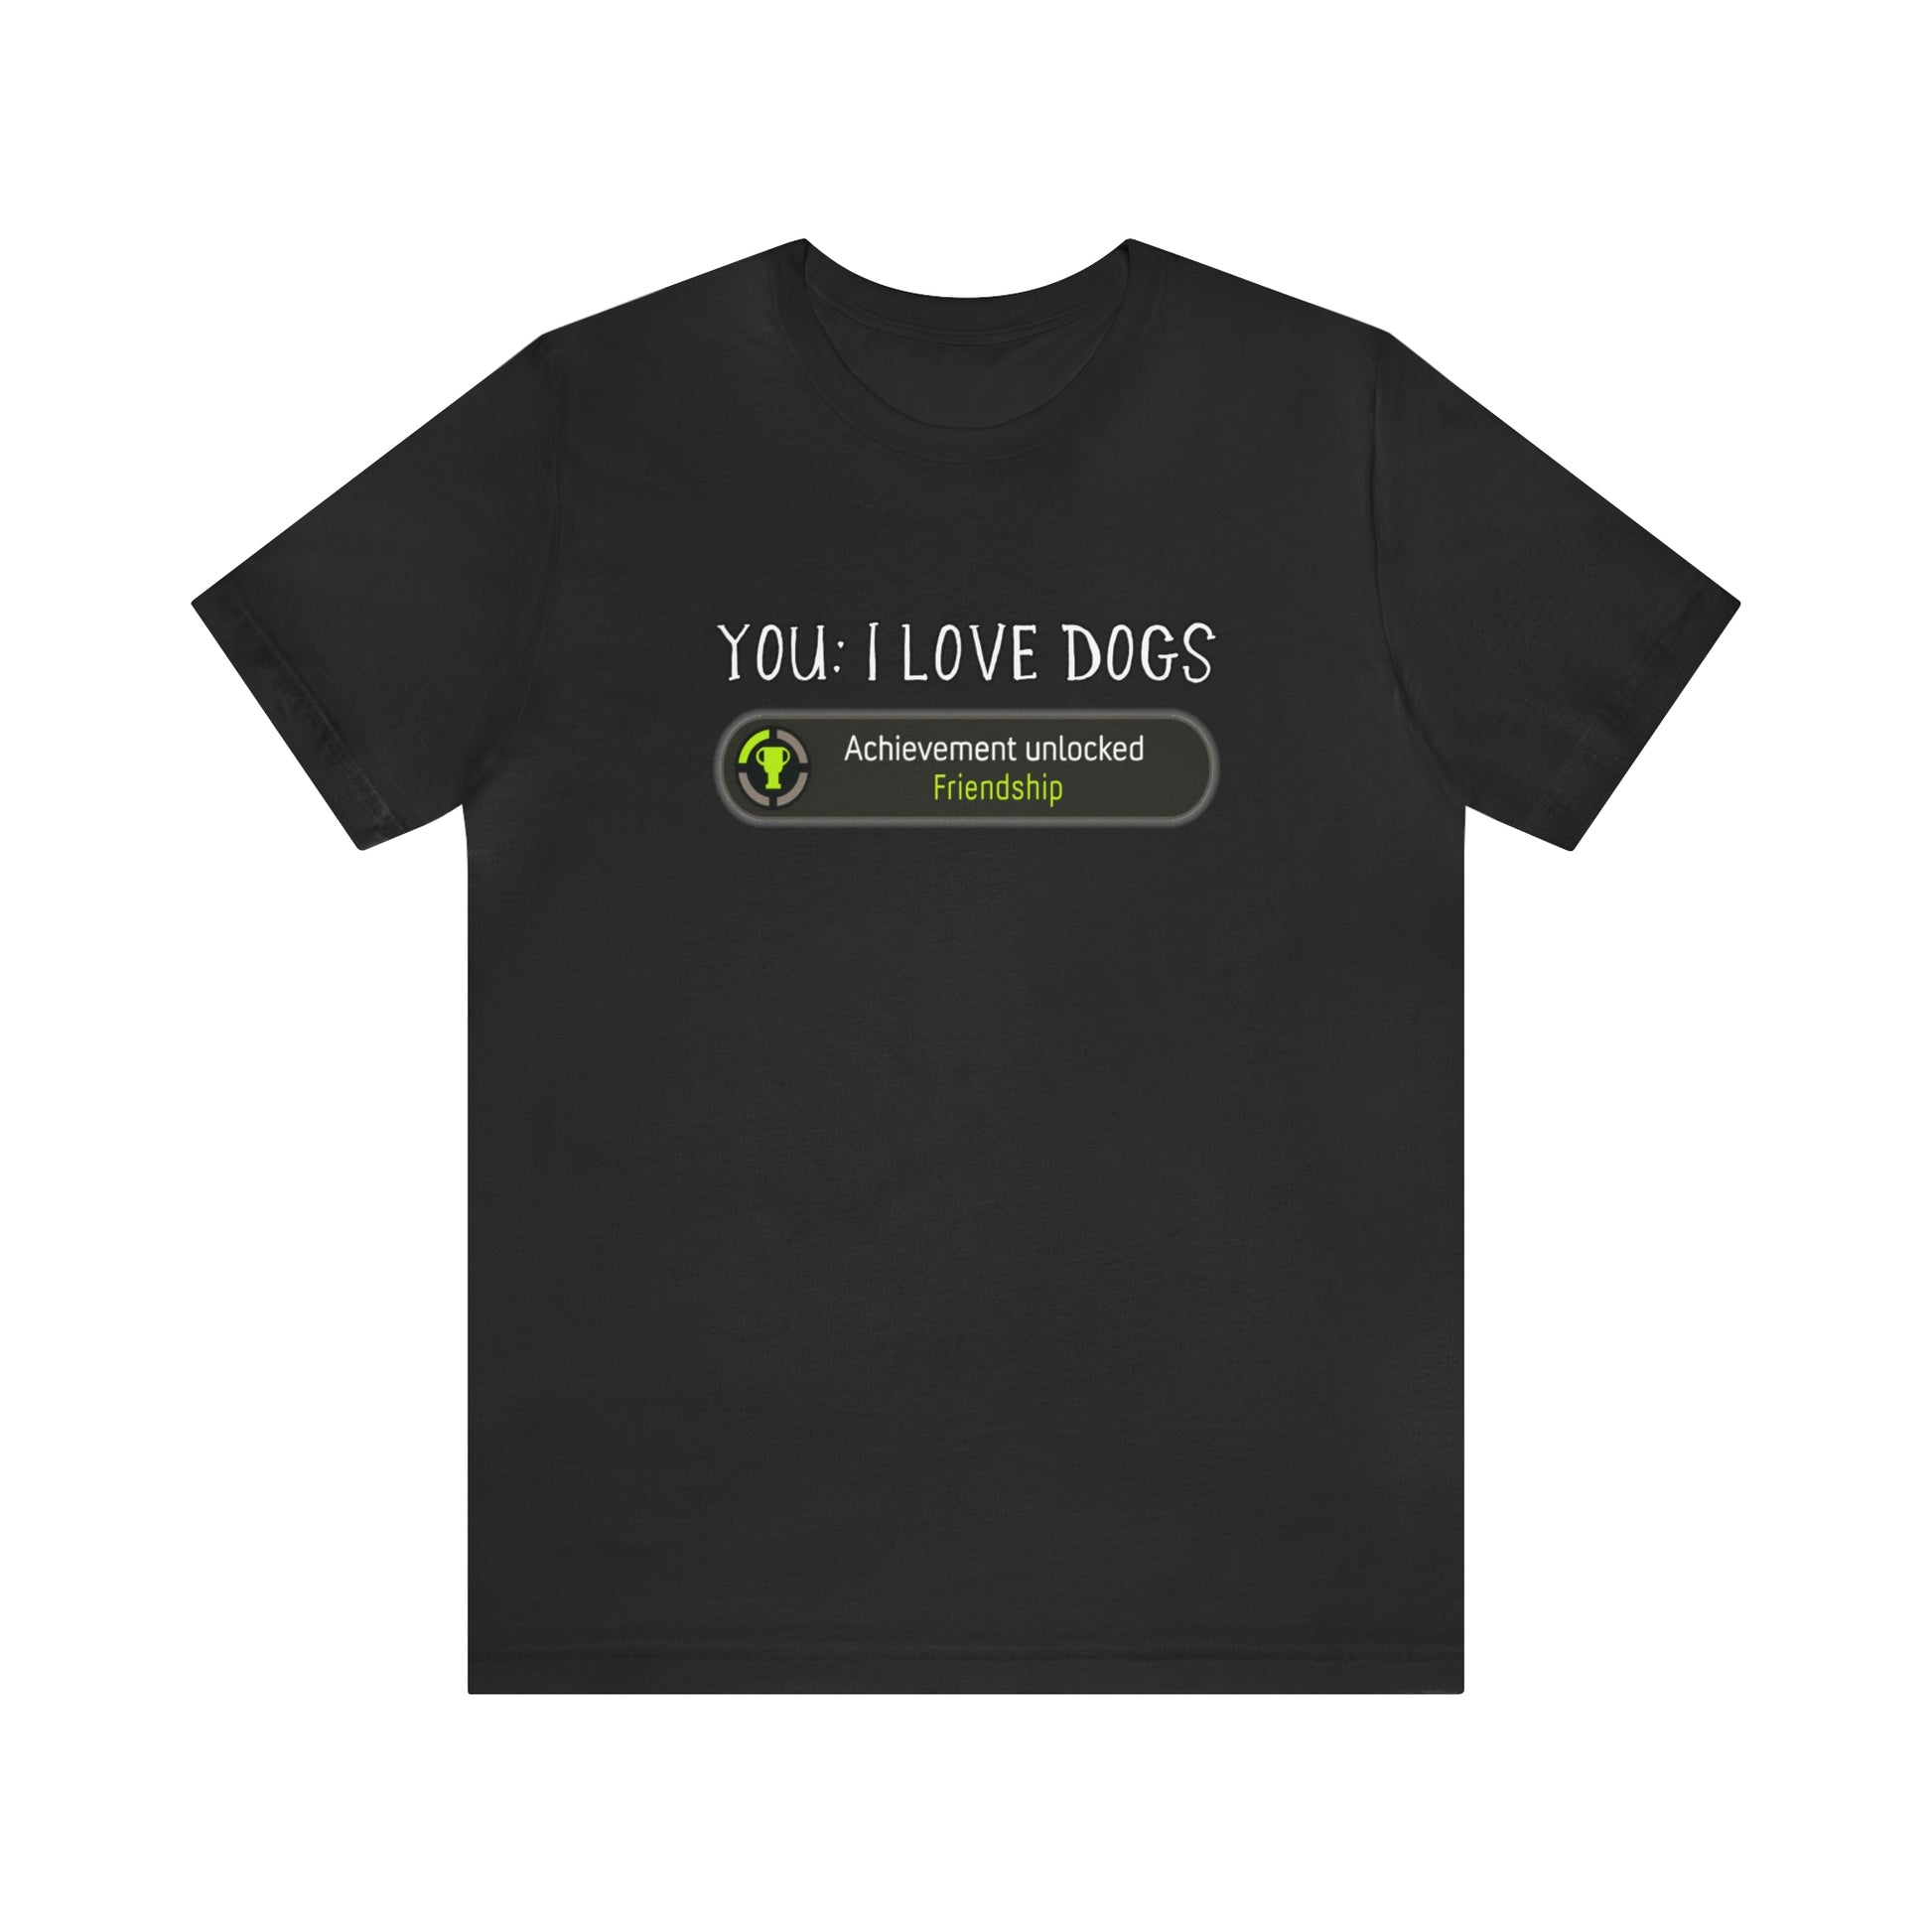 you love dogs funny t shirt